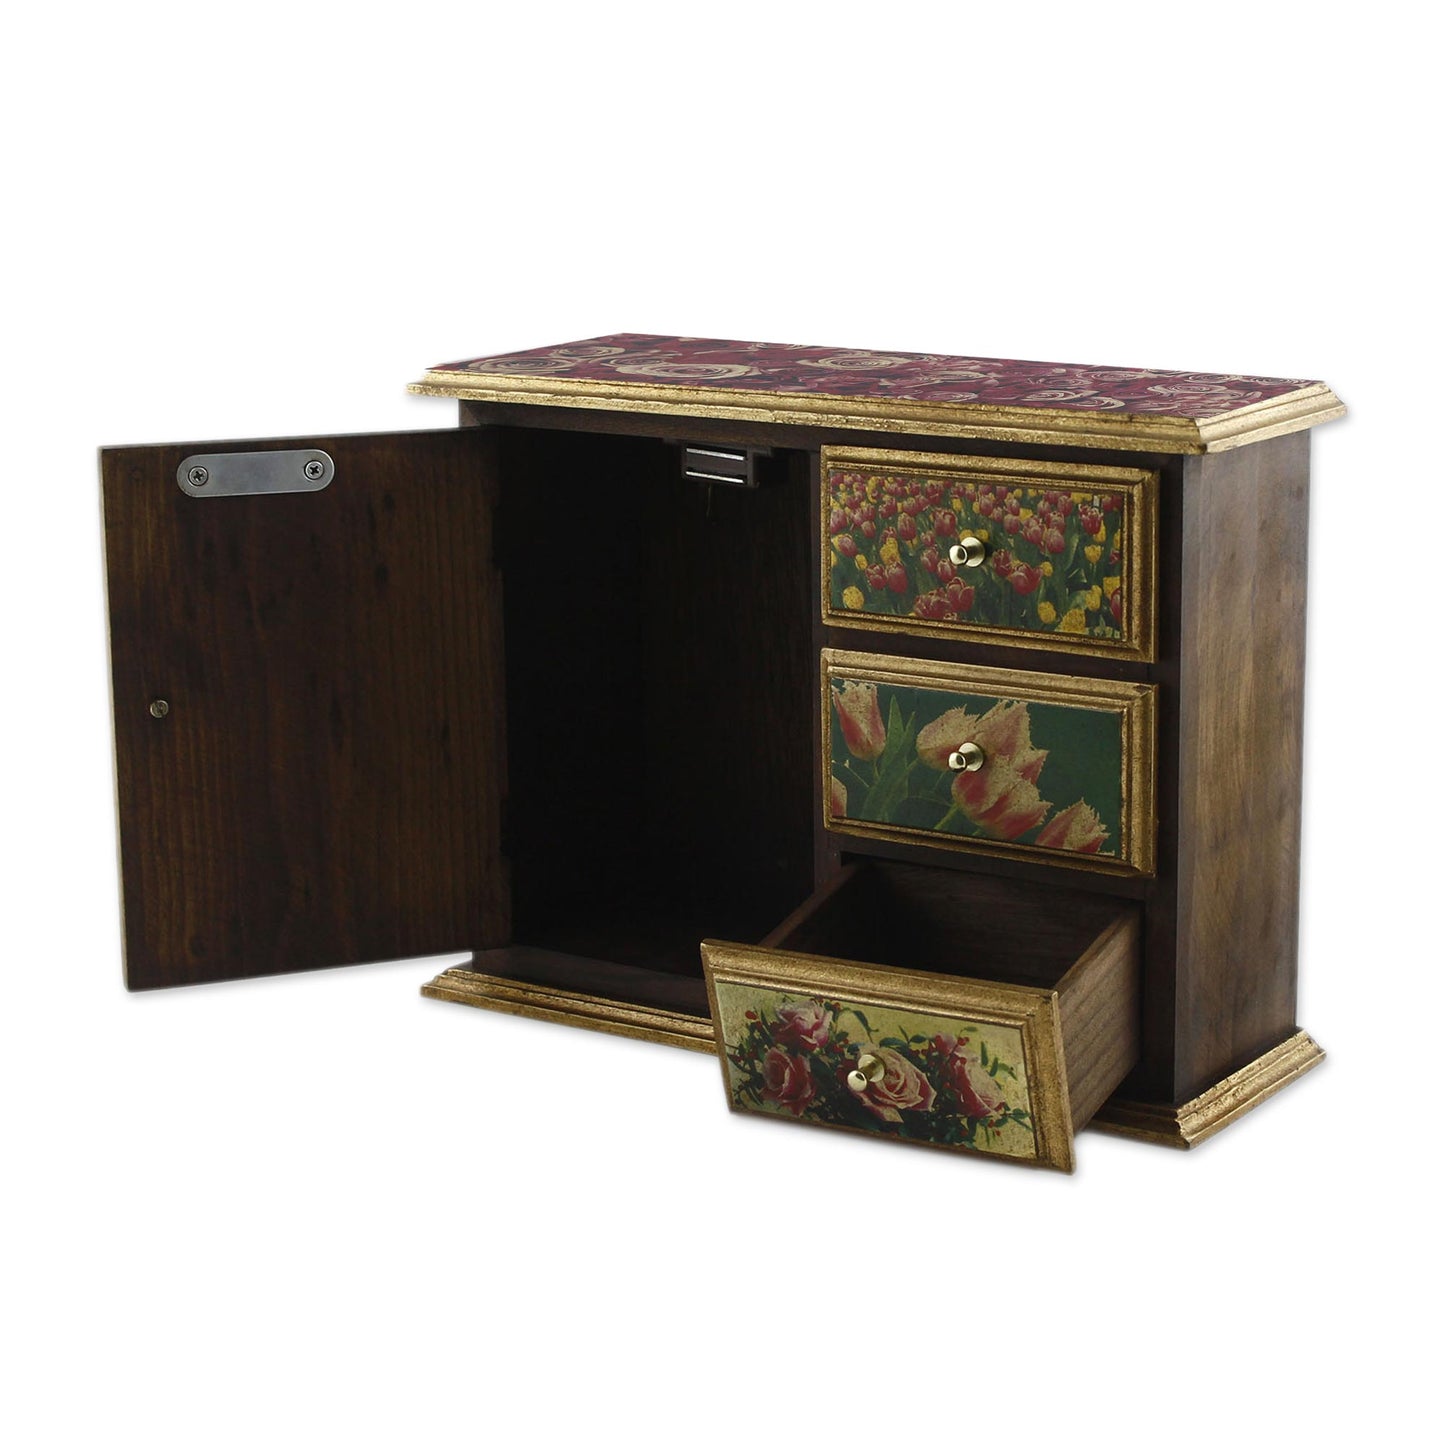 Beloved Guadalupe Decoupage chest